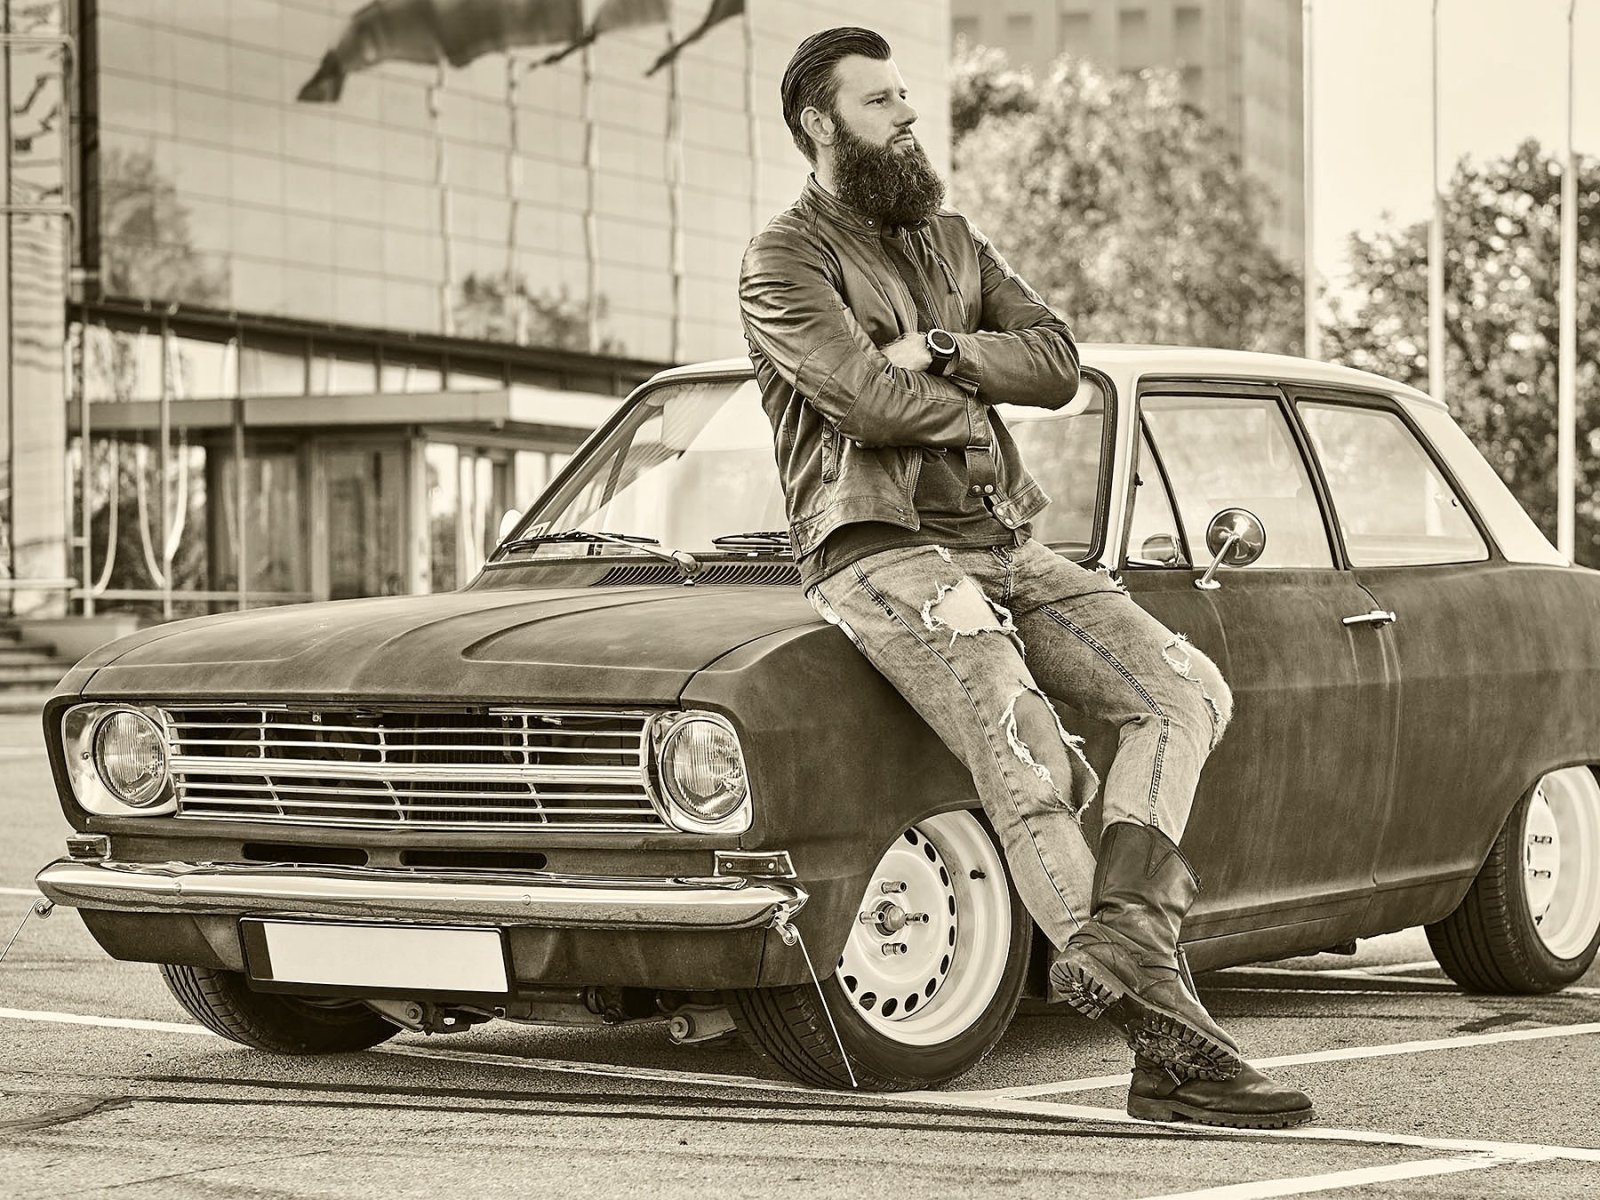 Bearded male dressed in brown leather jacket and boots leaning on tuned retro car in the city parking near skyscraper.